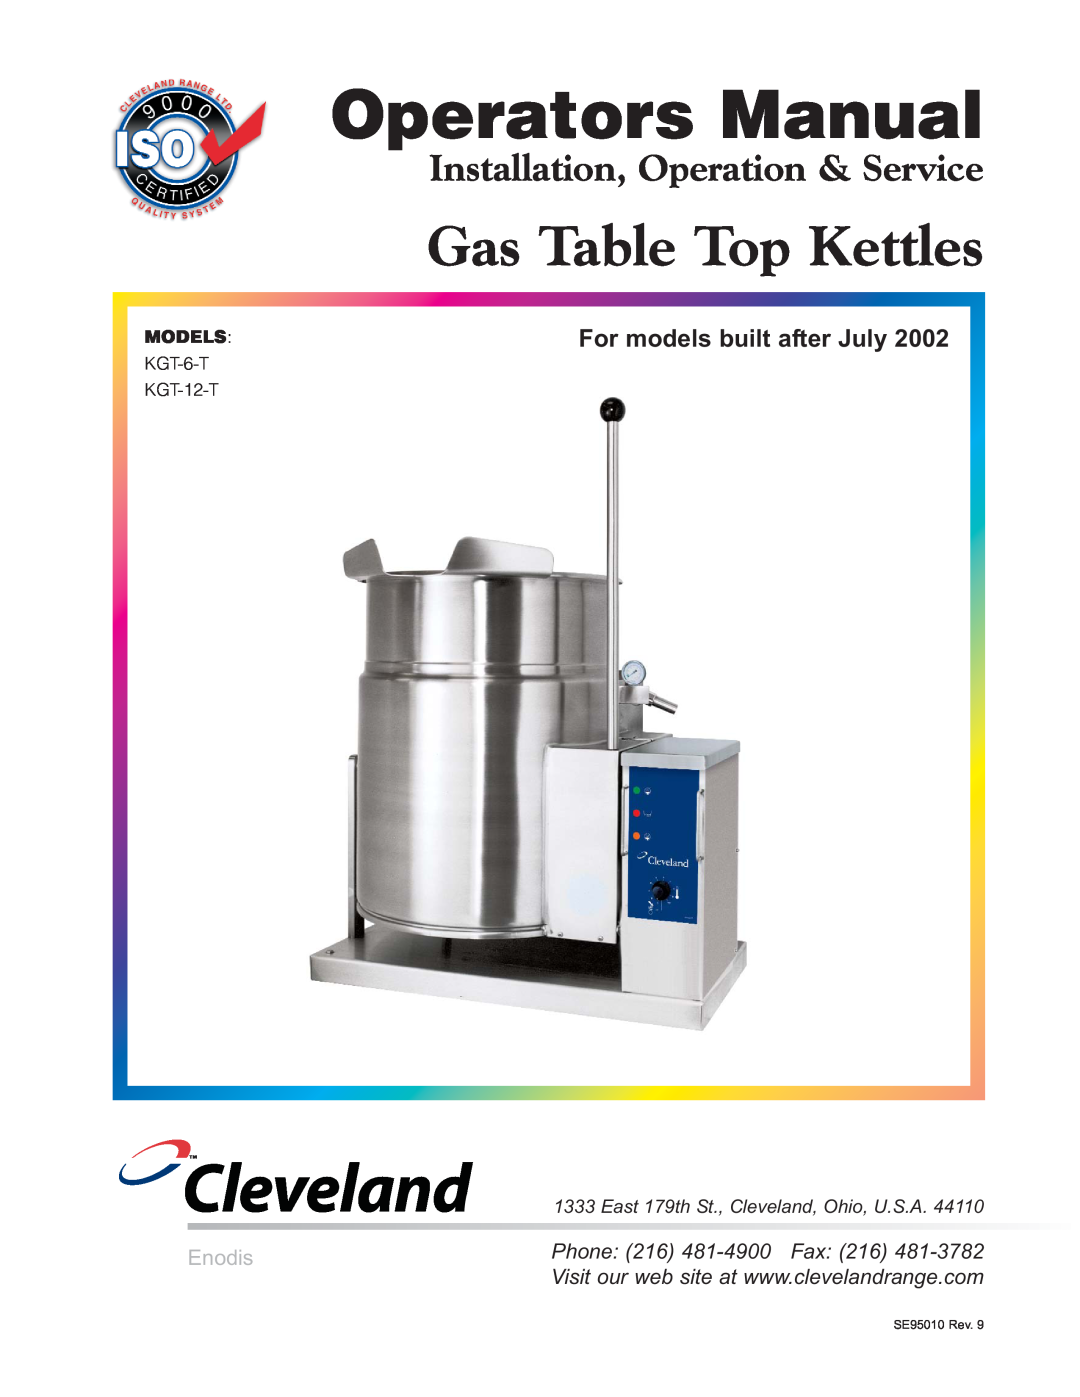 Cleveland Range KGT-6-T manual Operators Manual, Cleveland, Gas Table Top Kettles, Installation, Operation & Service 